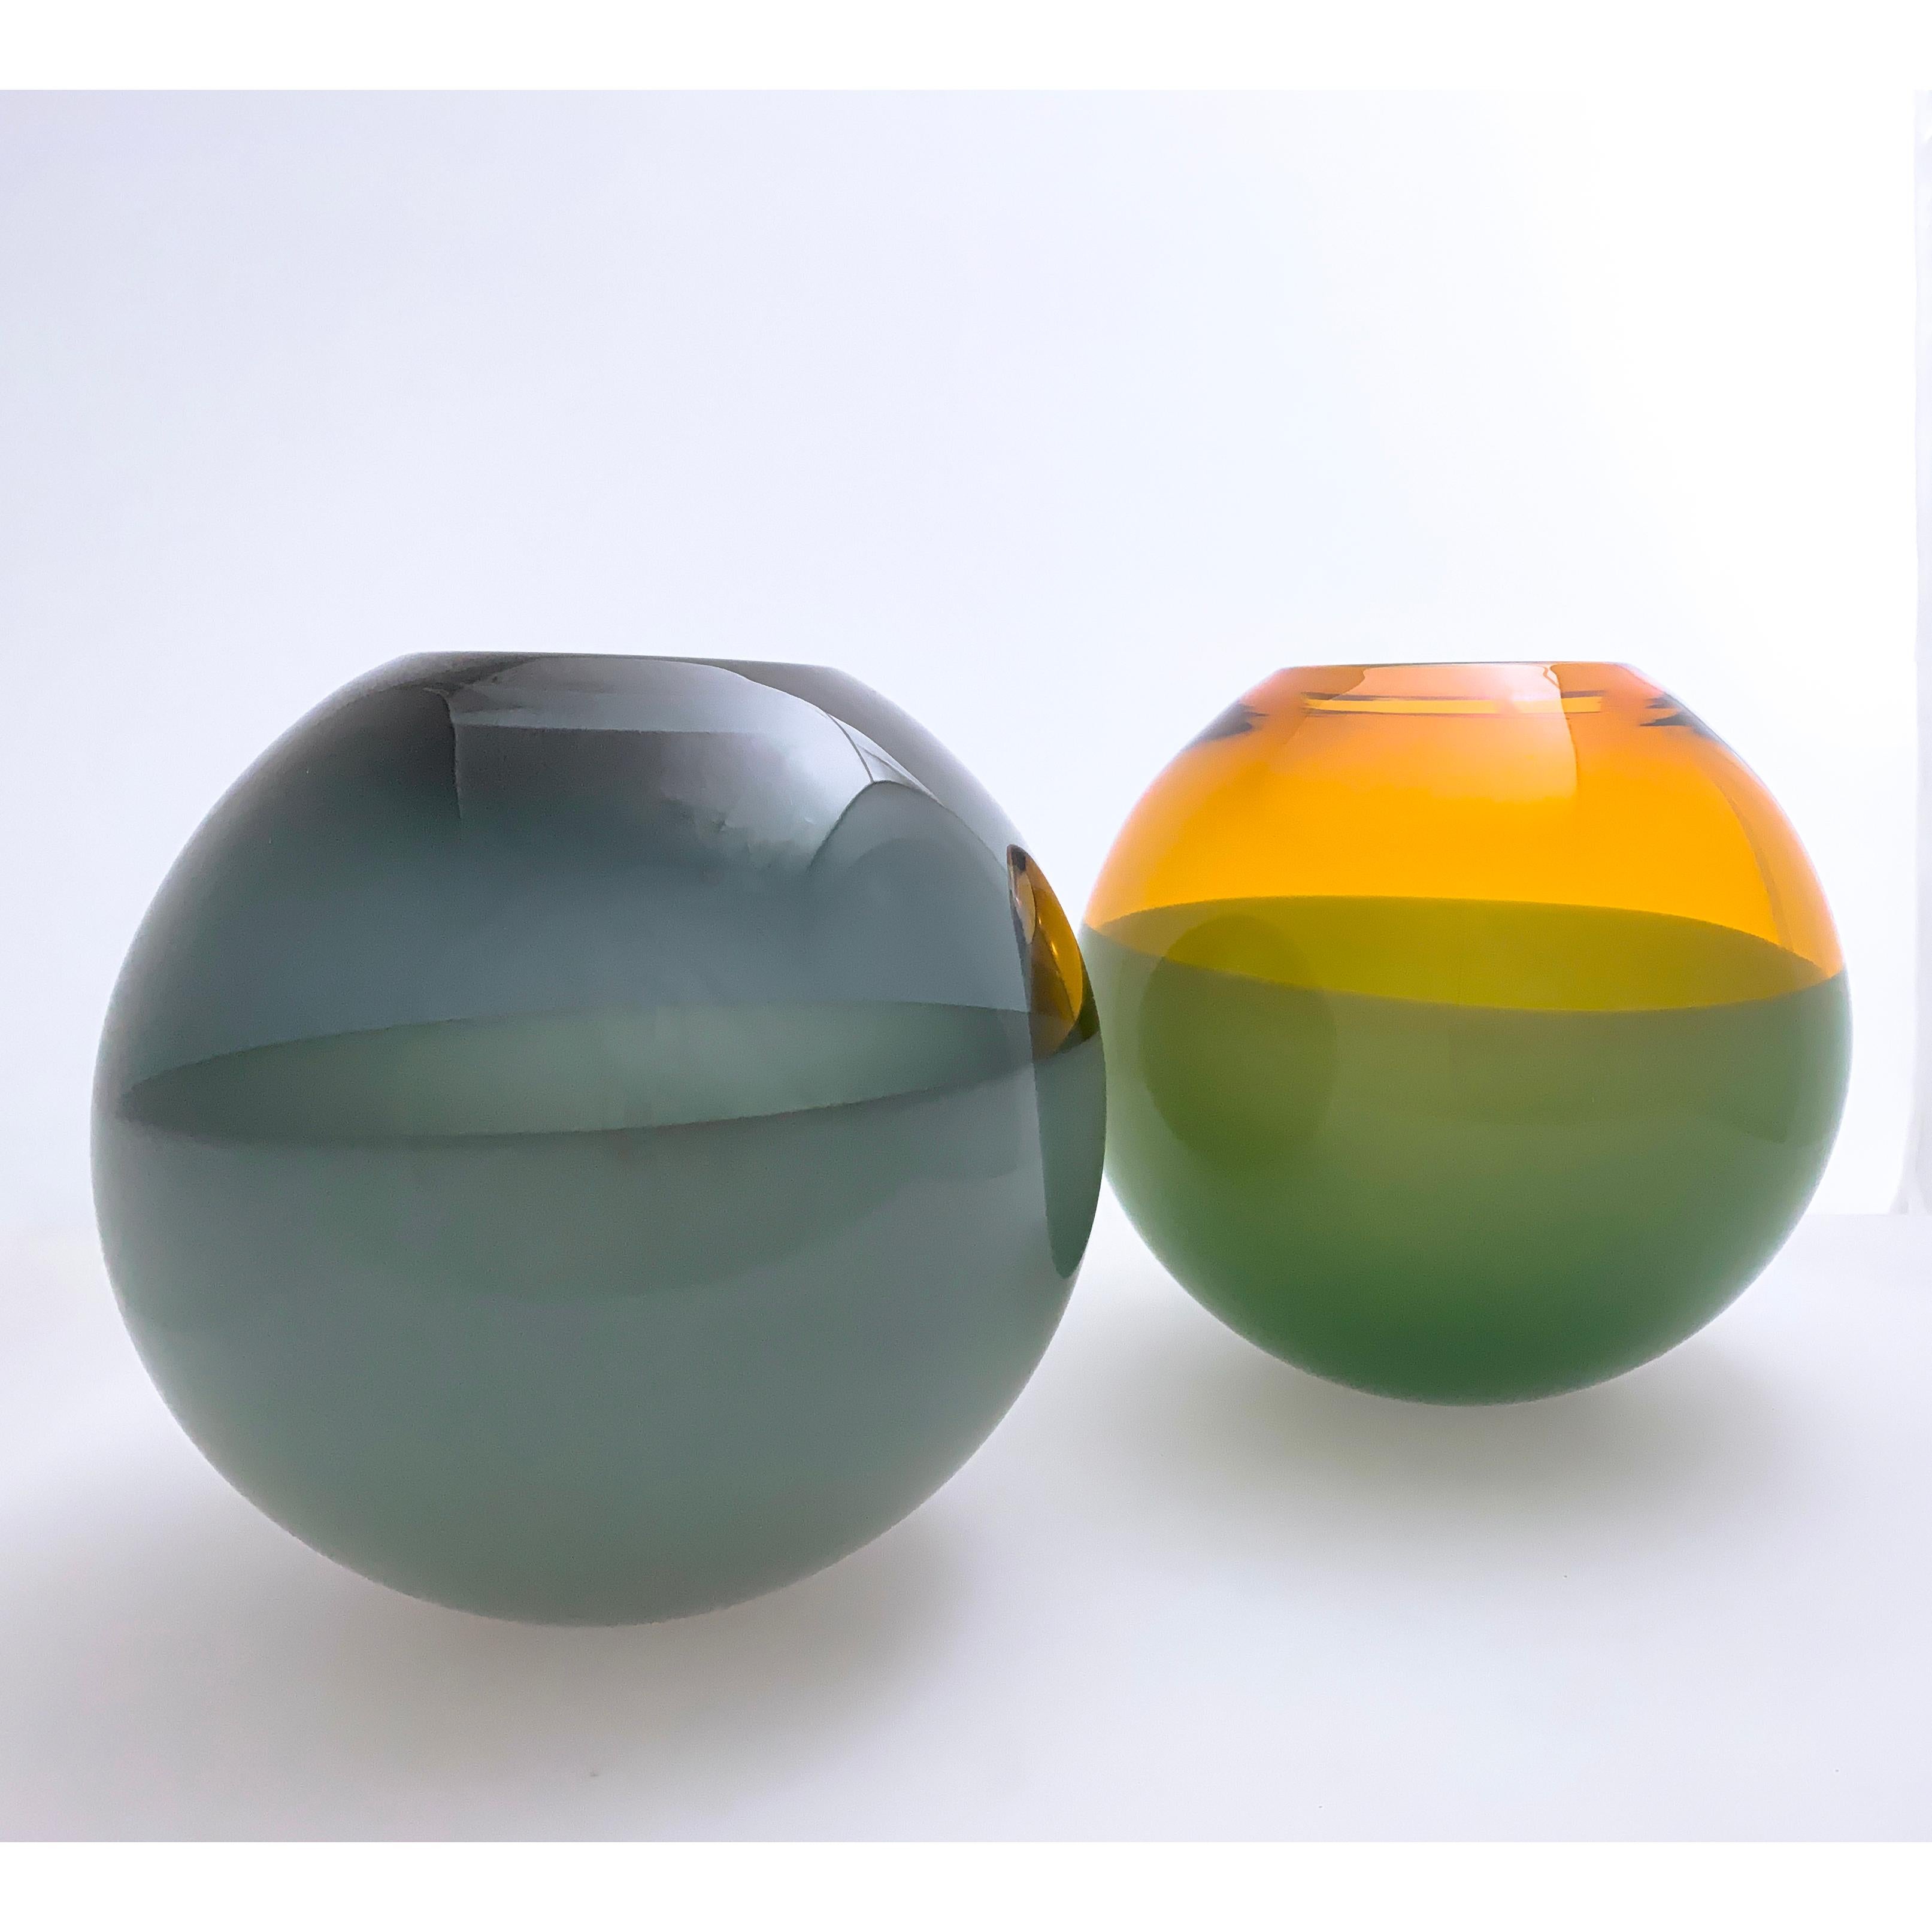 This is an original sample test and a one-of-a-kind shape. These works continue the language of contrast of the lattimo and banded lines but use two complementary colors. Hand blown and shaped in lead free crystal. Designed and made by Siemon and